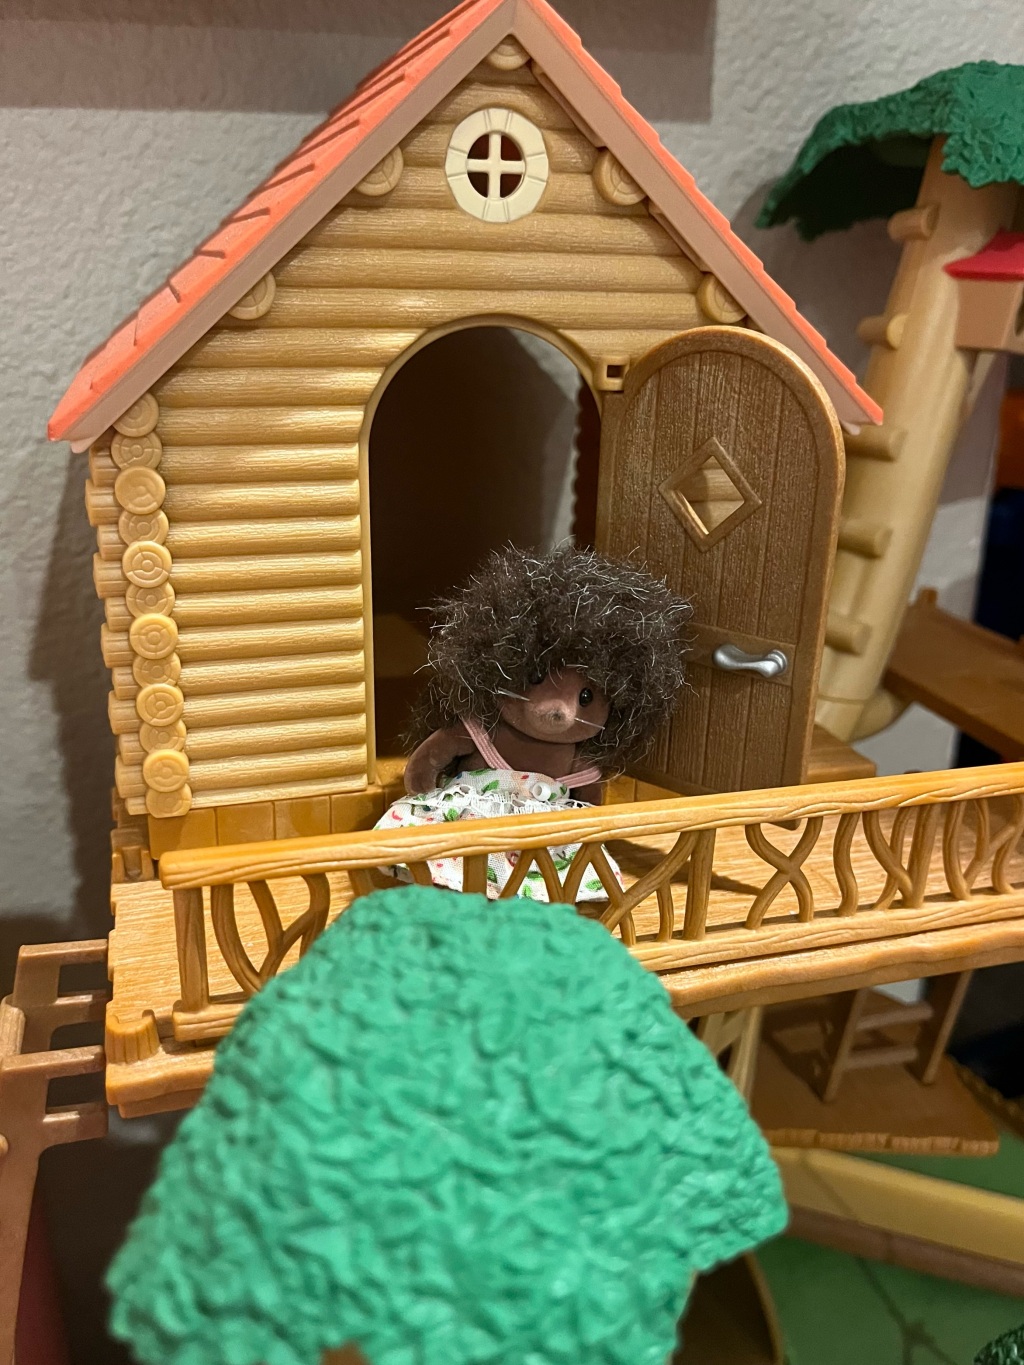 Calico Critter Hedgehog in treehouse